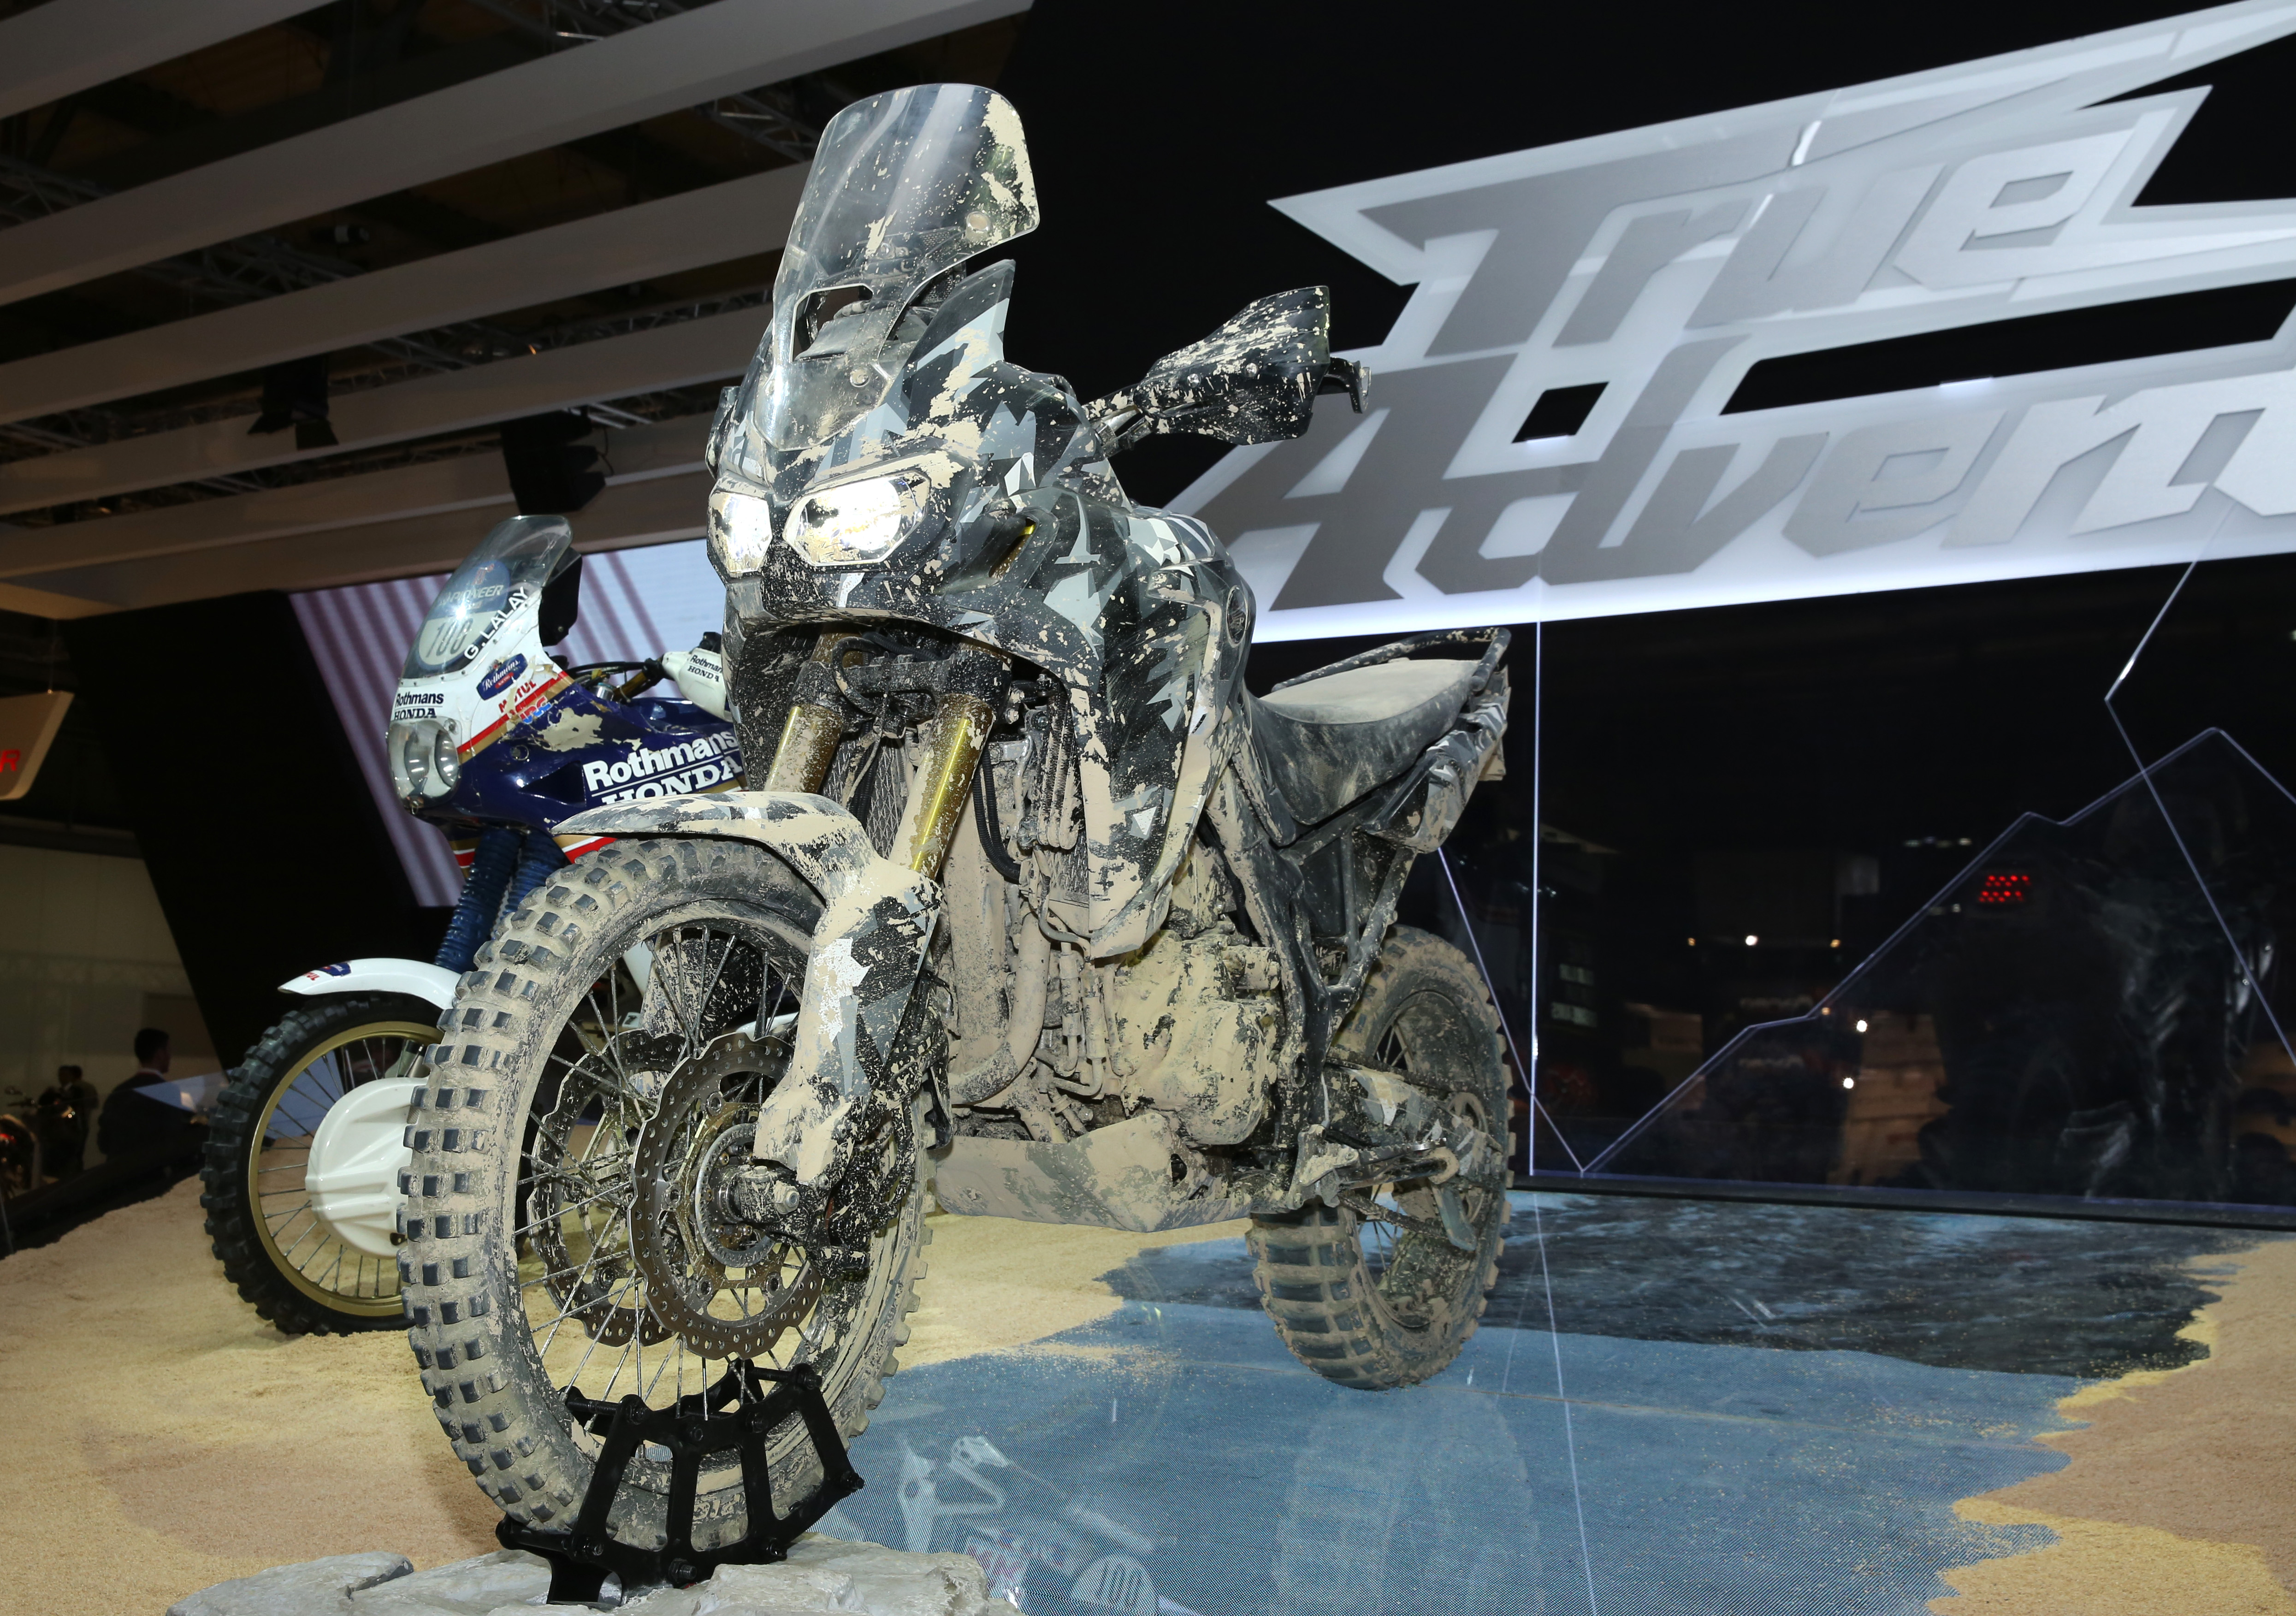 The best bikes to see at Motorcycle Live